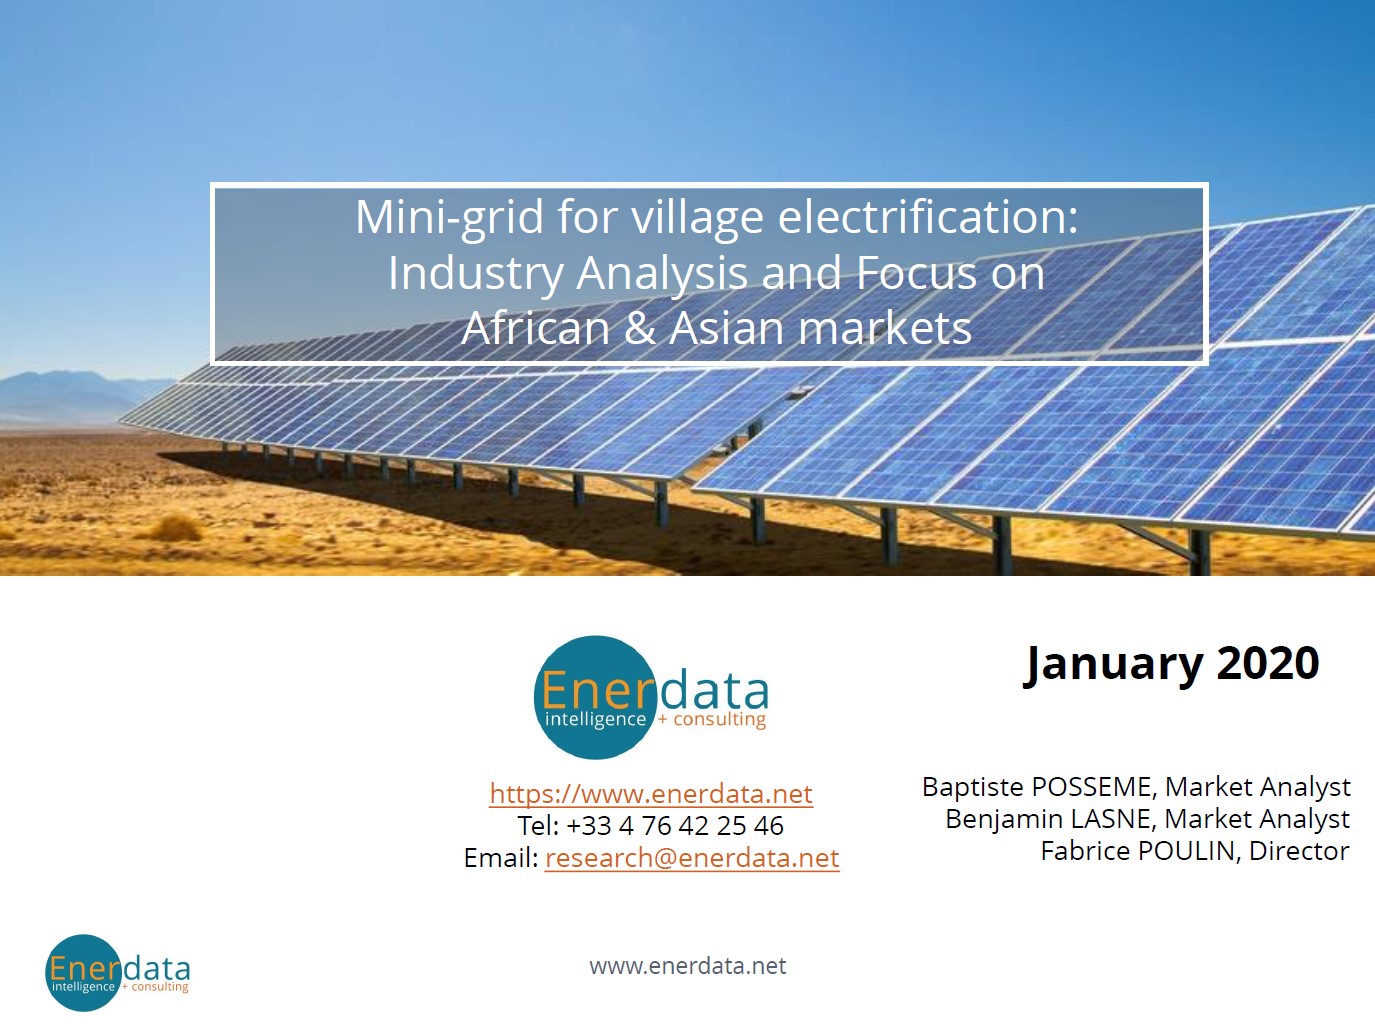 Mini grid Africa & Asia markets for village electrification